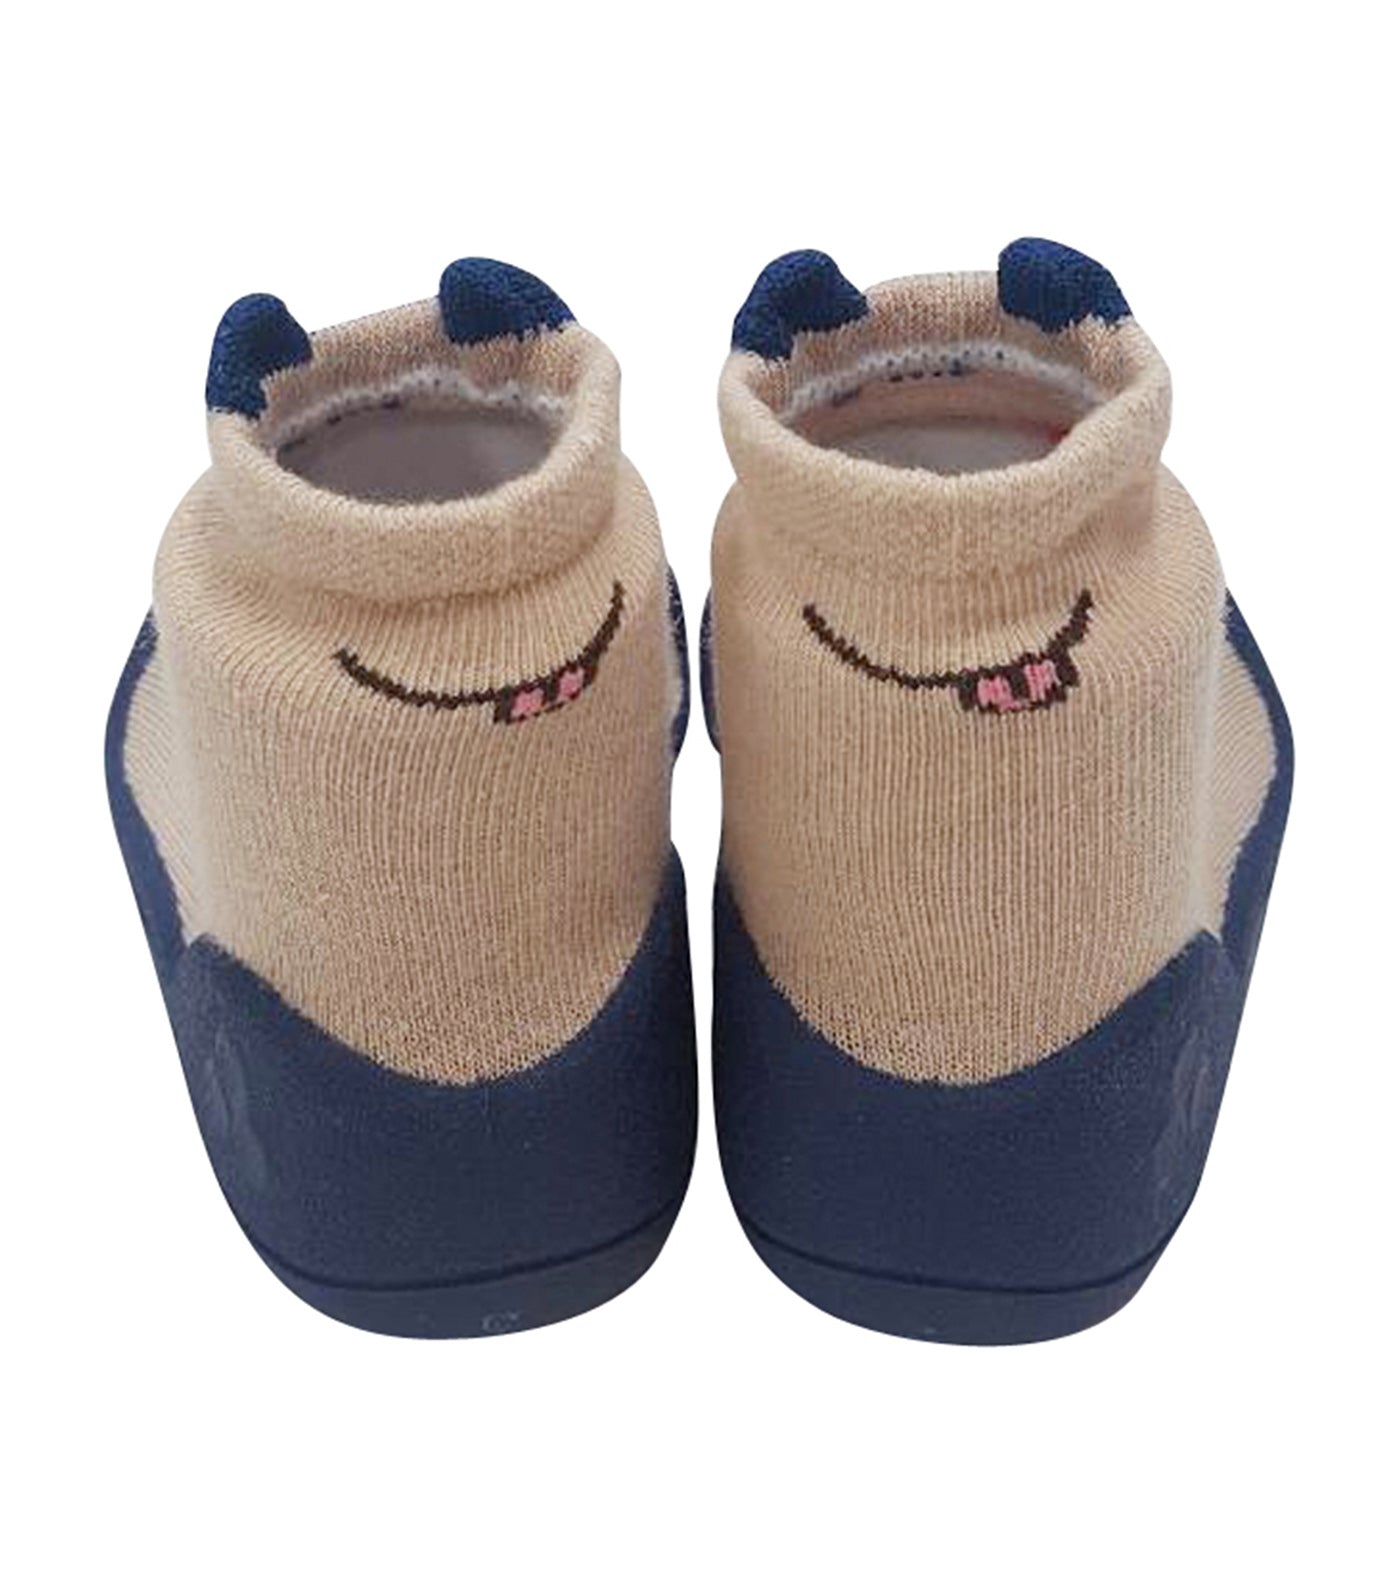 attipas candy shoes navy